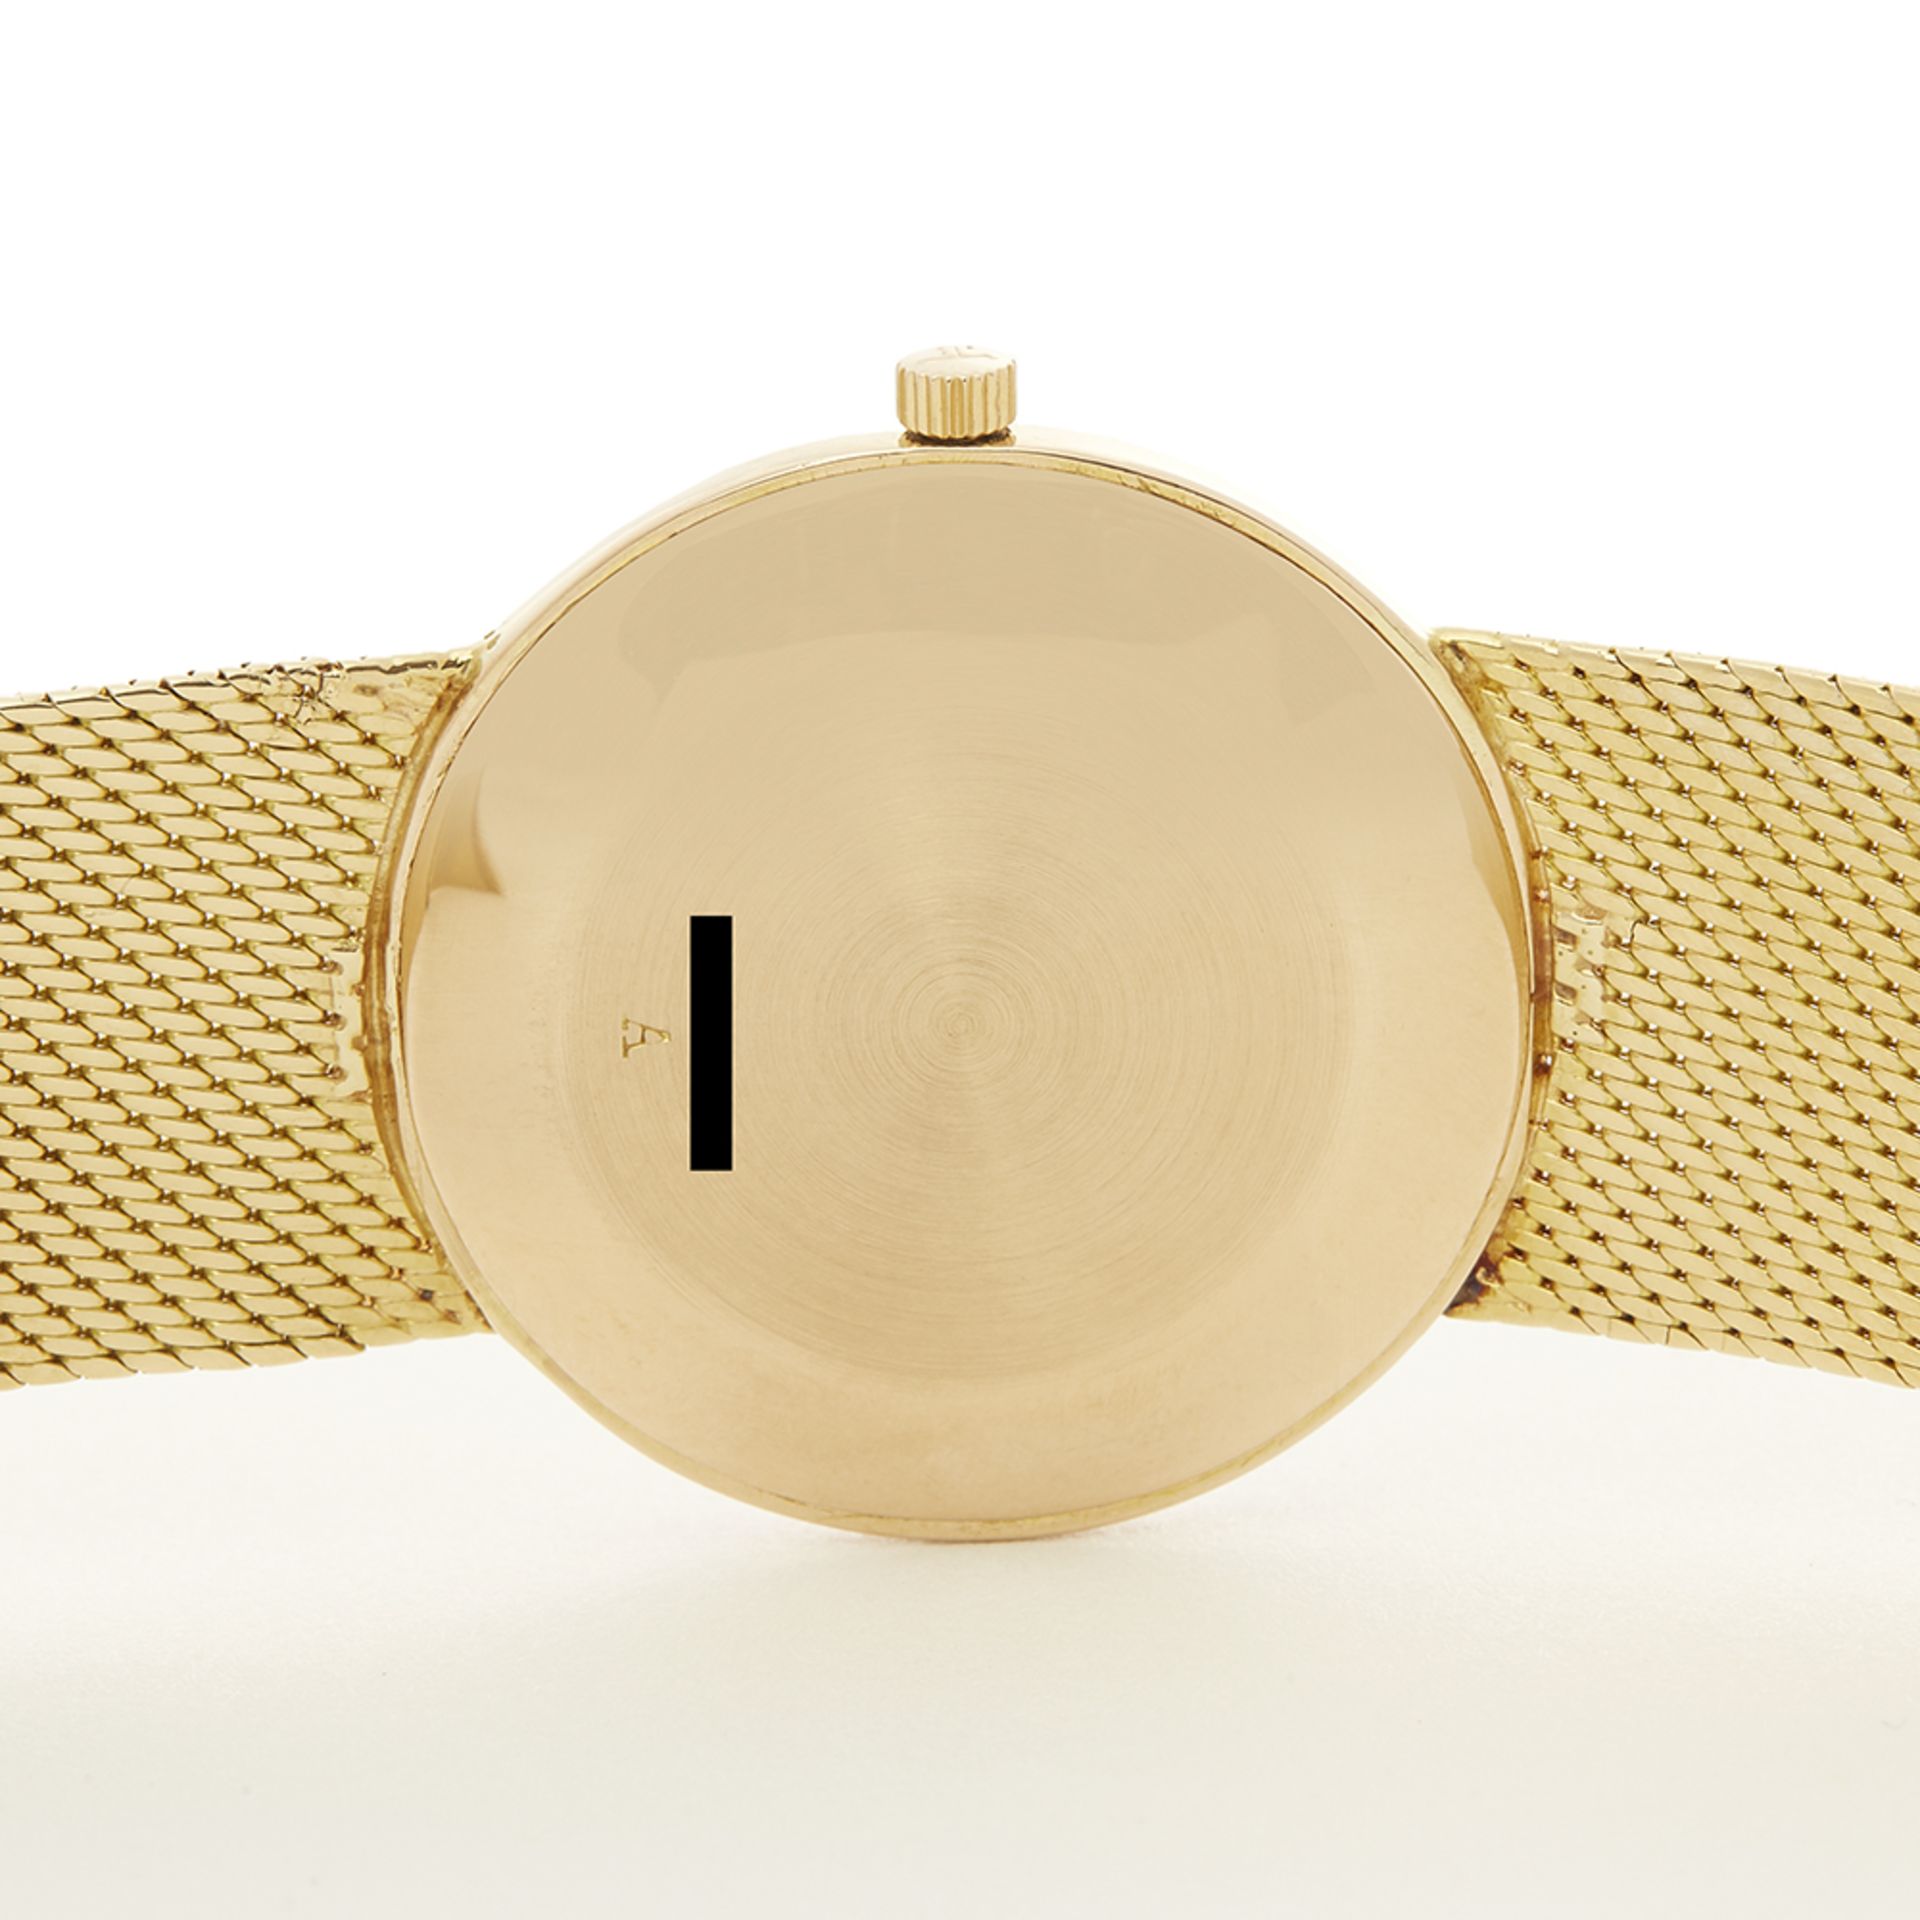 Jaeger-LeCoultre Vintage 18K Yellow Gold - Image 7 of 7